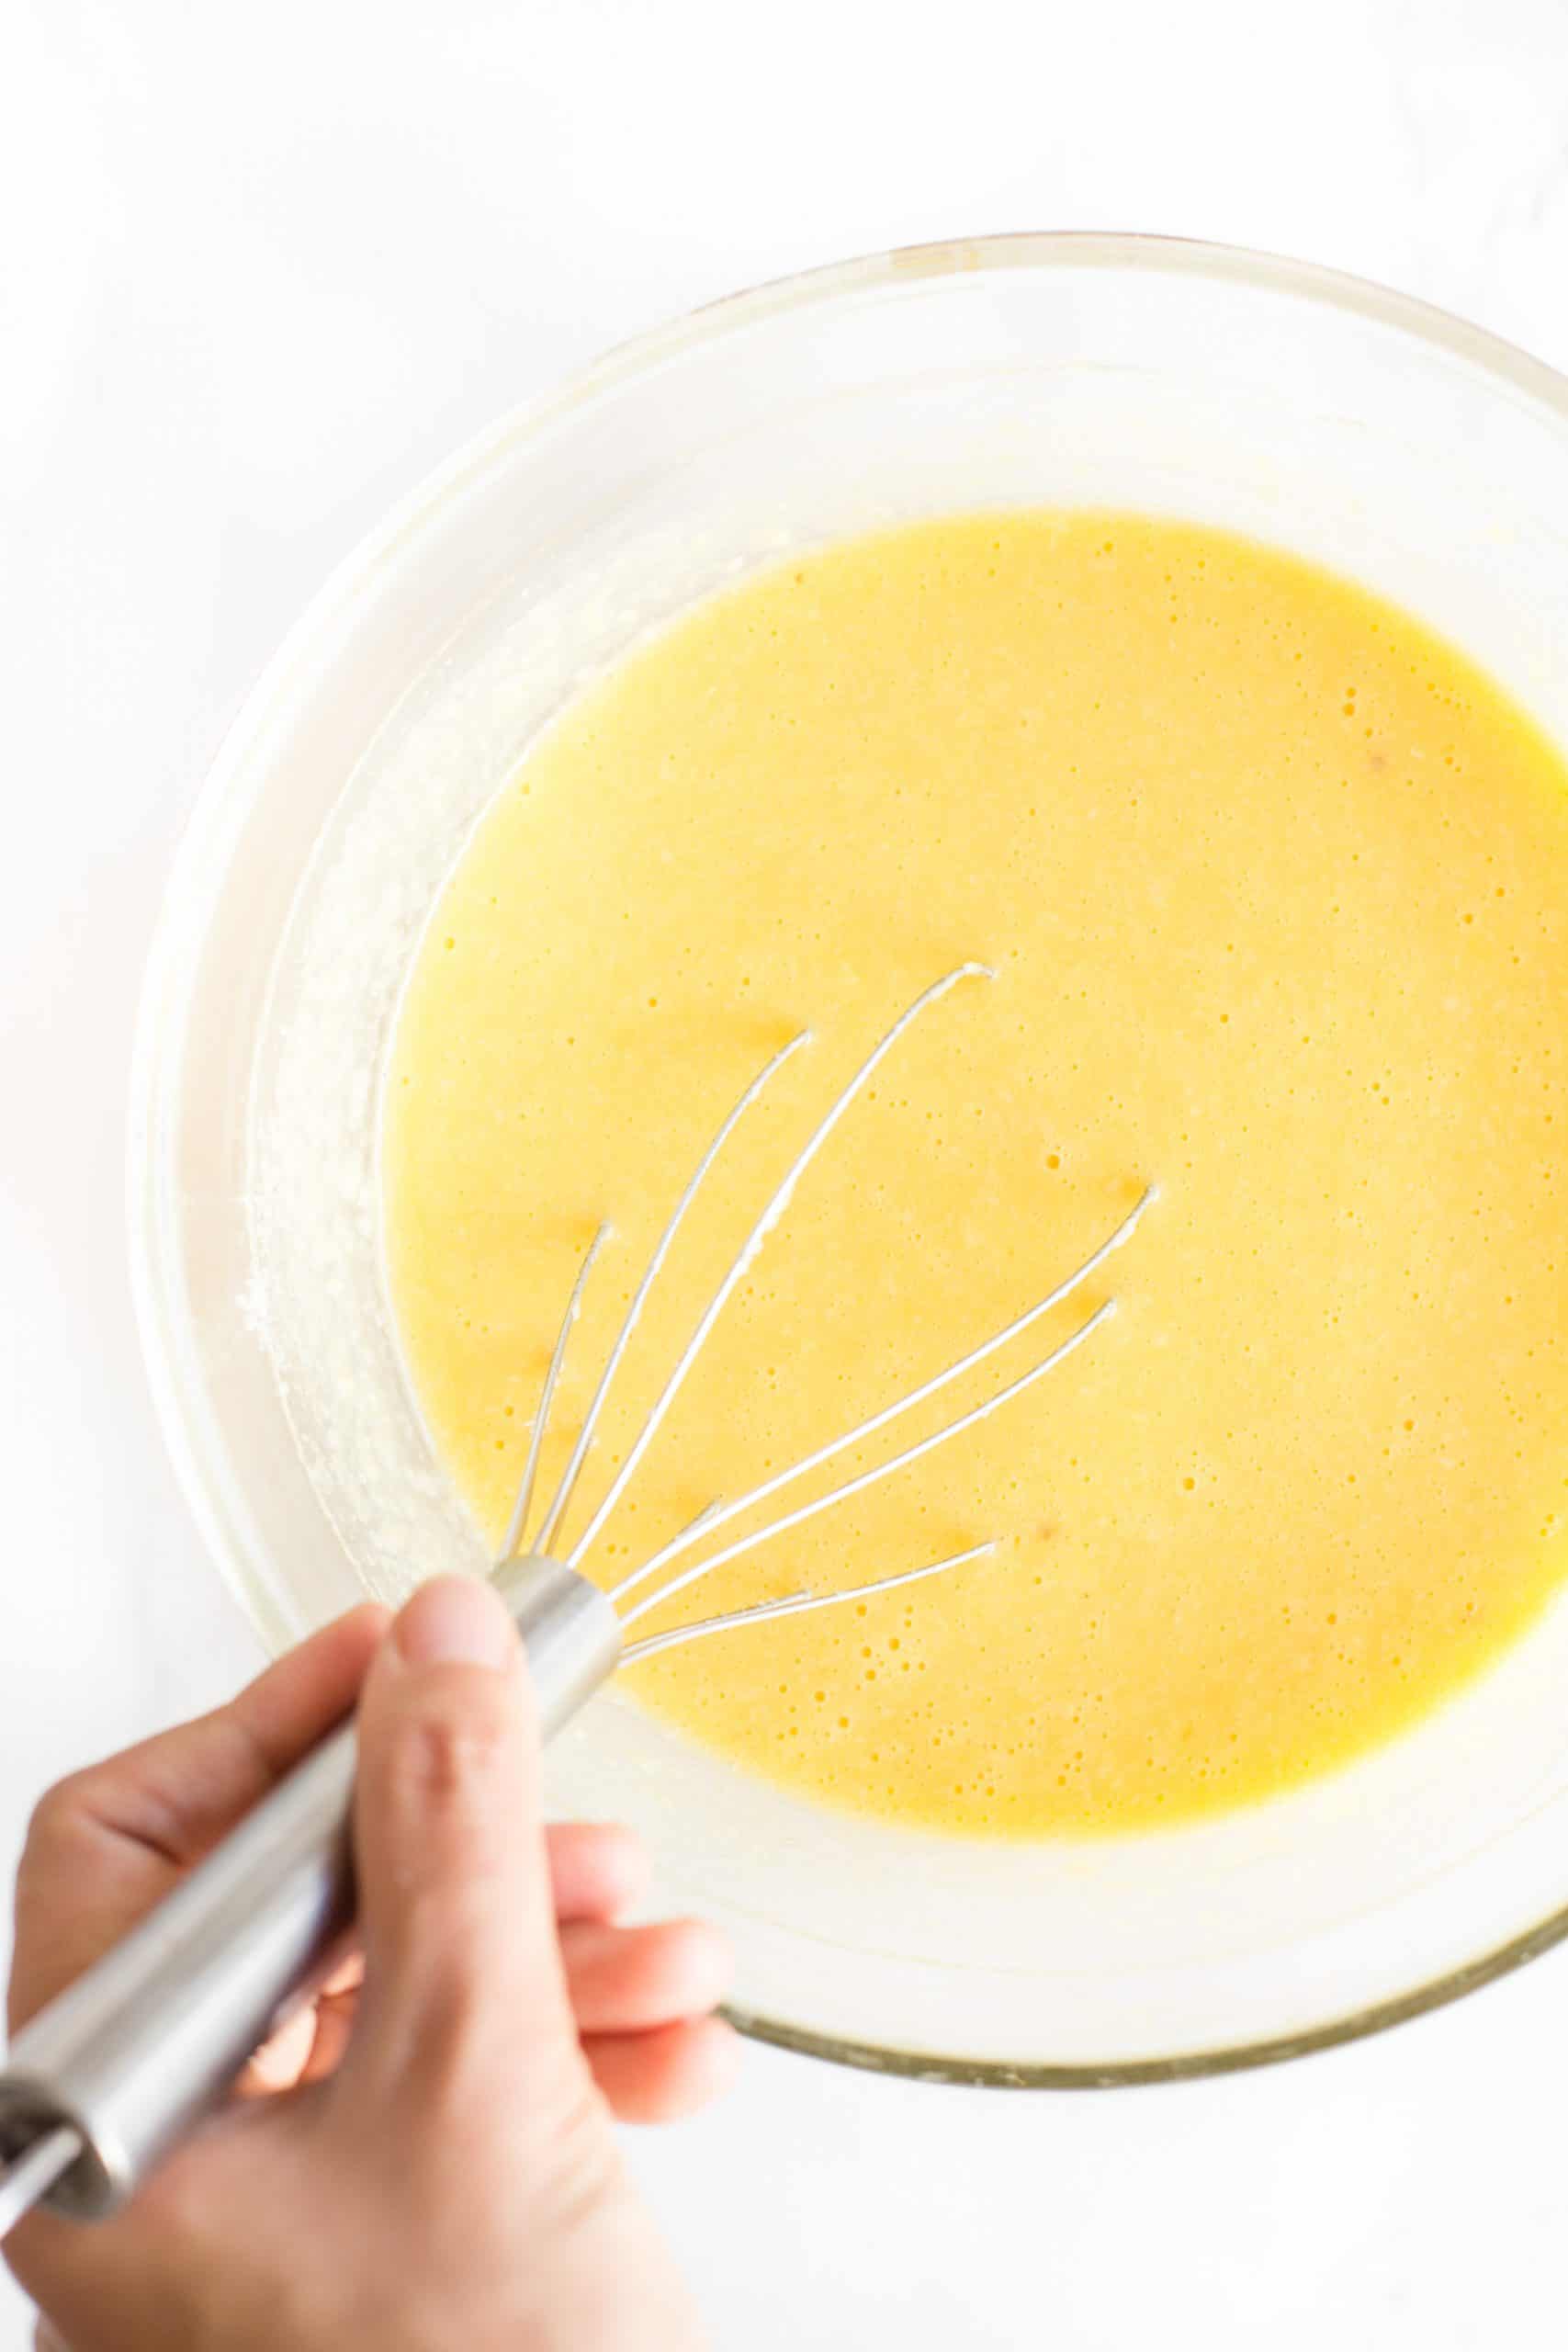 Hand whisking quick bread batter in a large bowl.